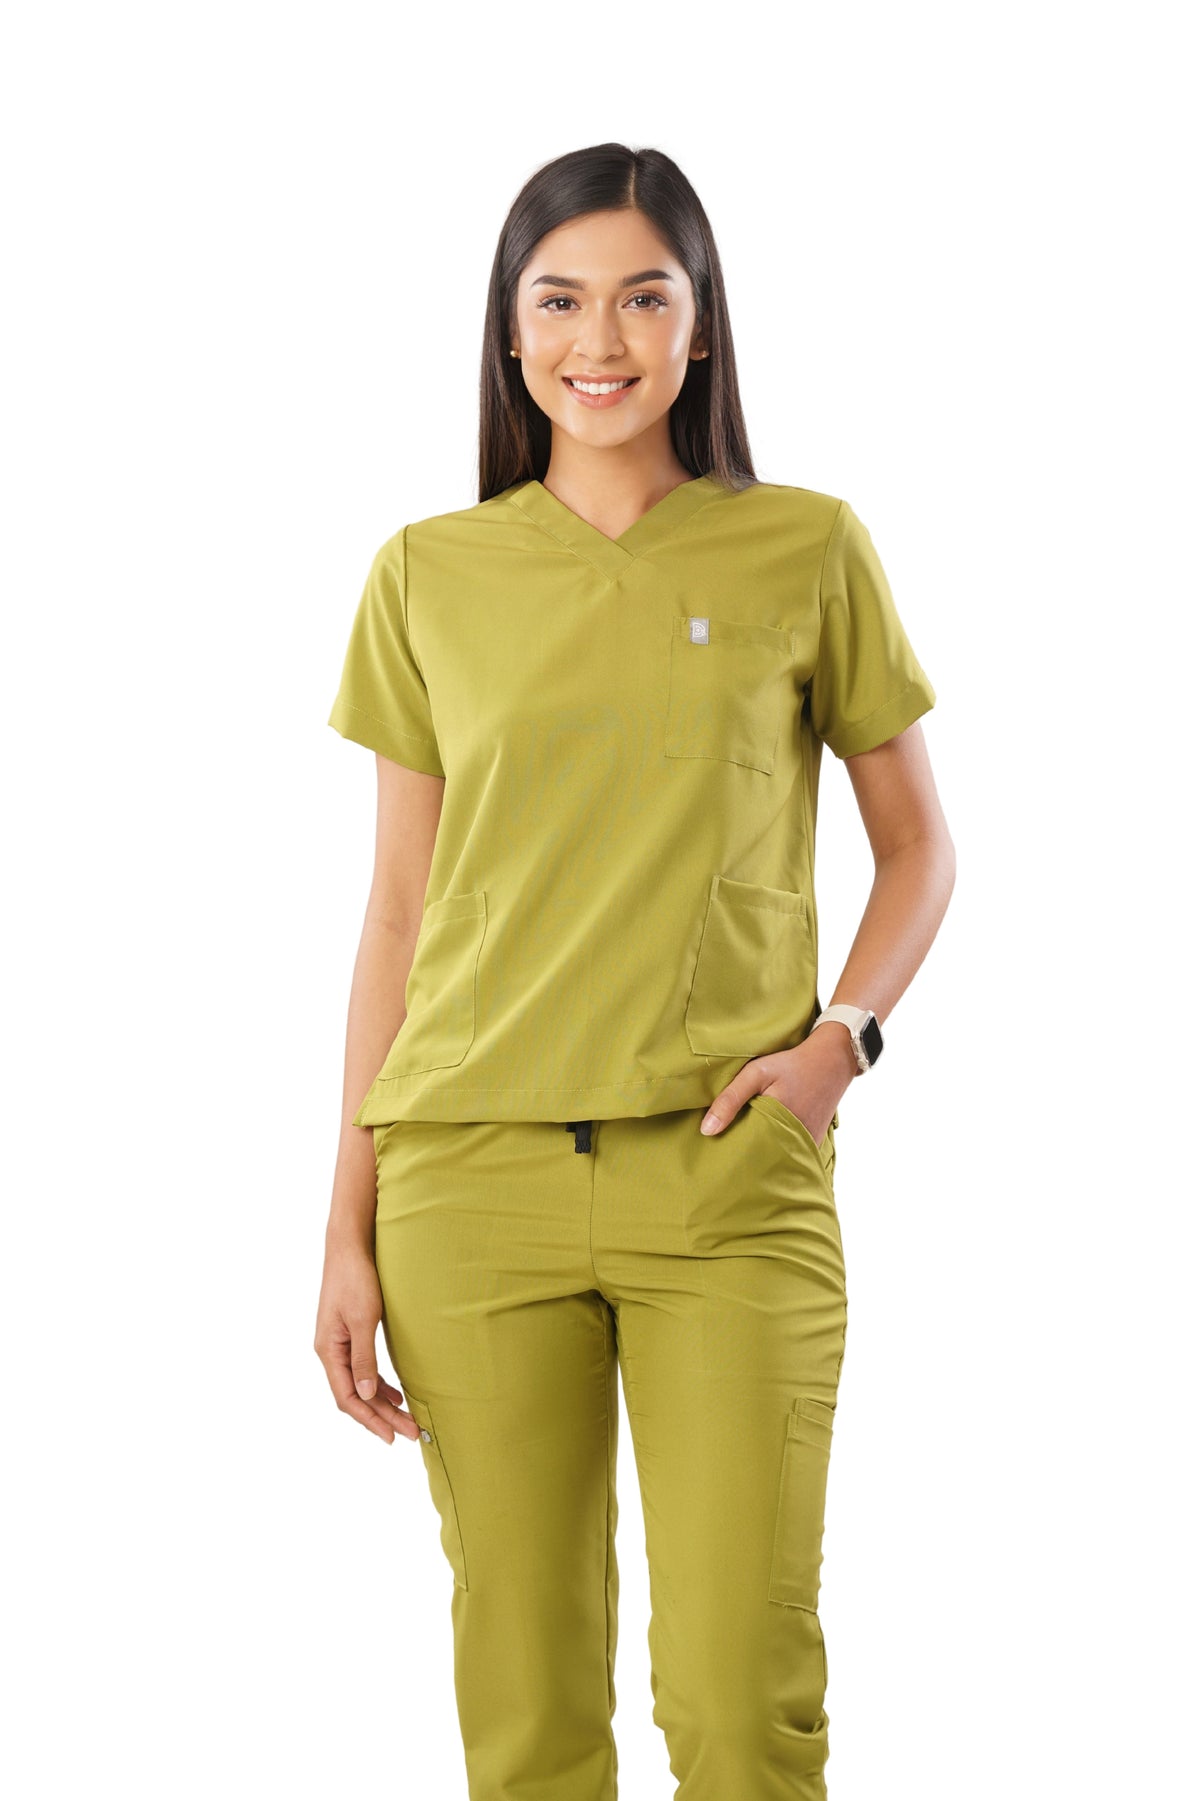 Women’s Durasmooth V-Neck Top (TOP ONLY)